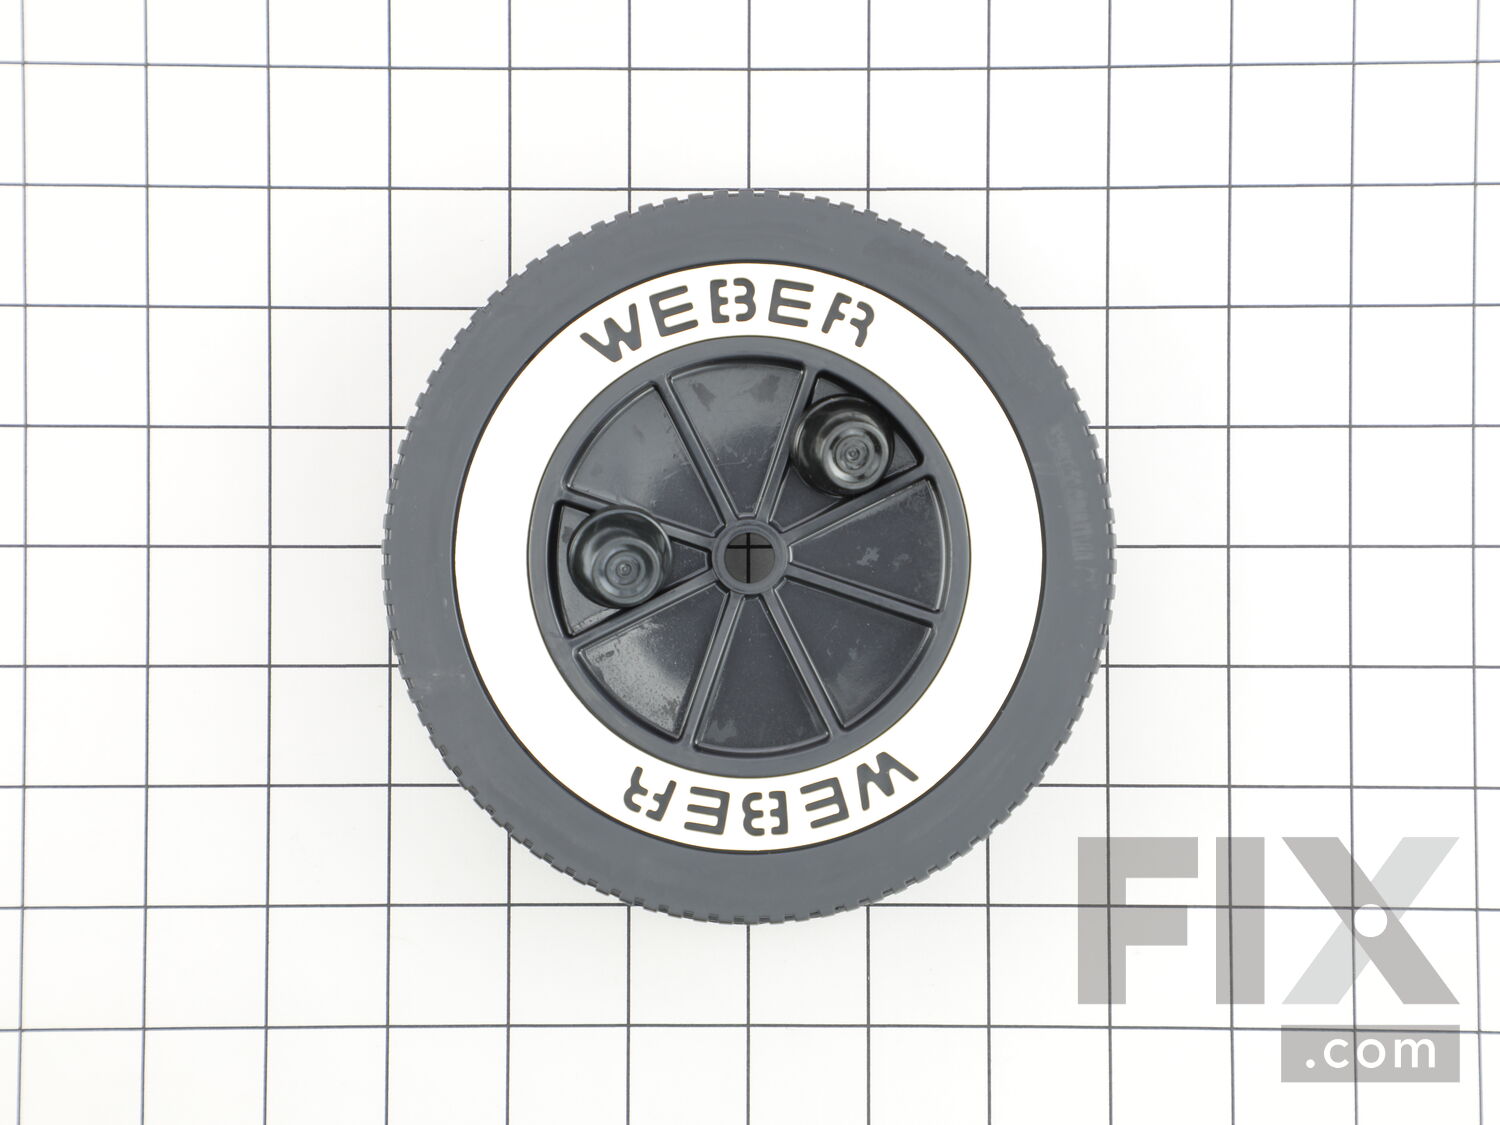  65930 Grill Wheels Replacement Parts for Weber Kettle